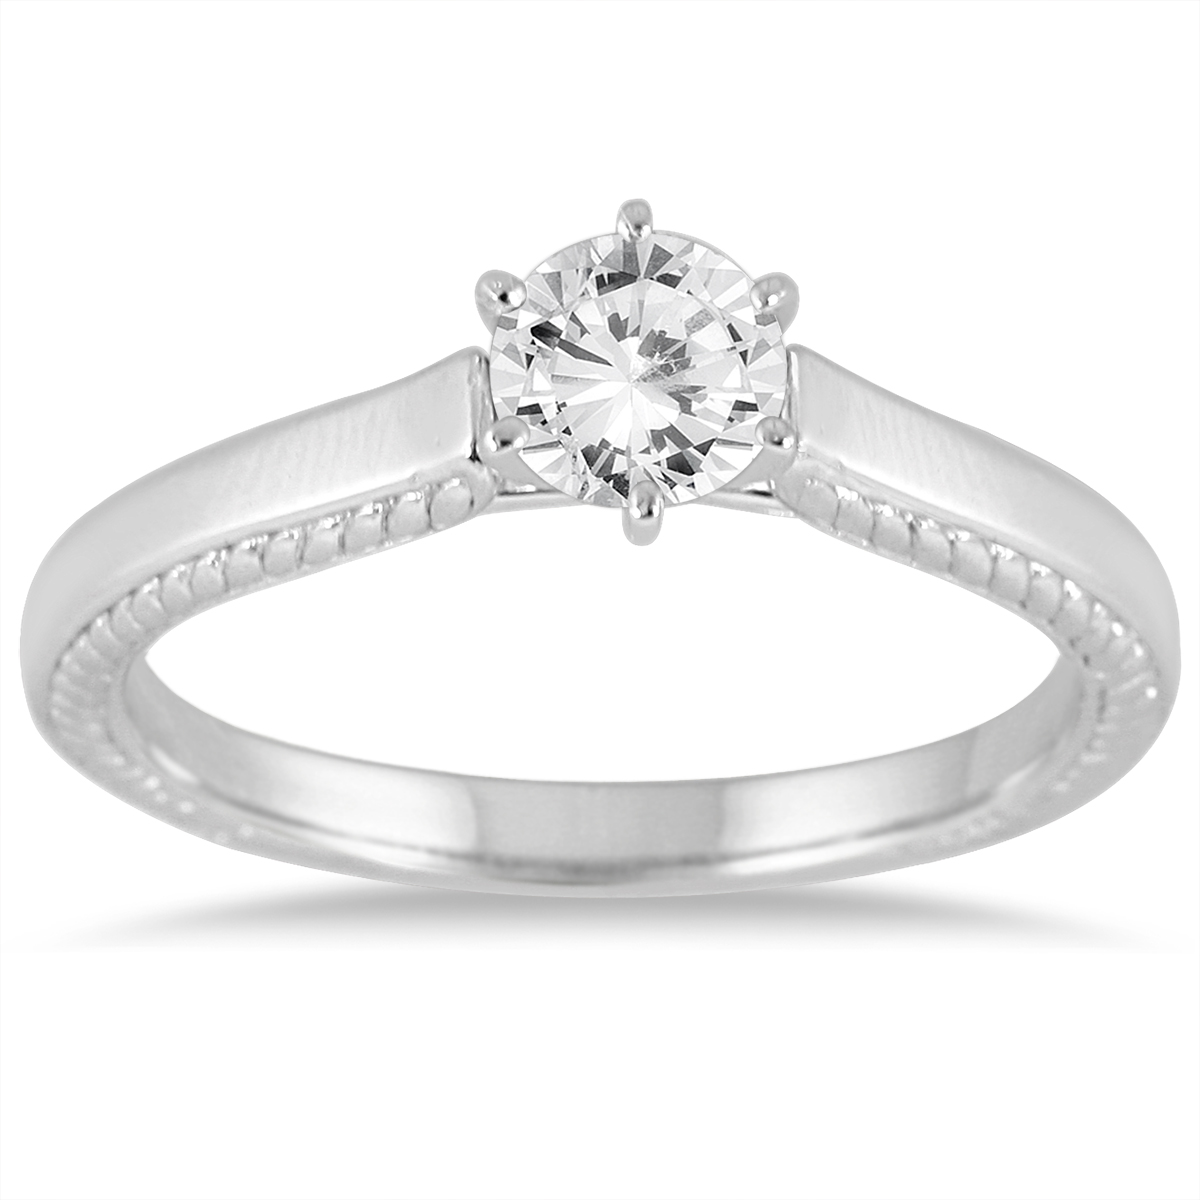 szul.com AGS Certified 1 Carat Diamond Cathedral Ring in 14K White Gold (J-K Color, I2-I3 Clarity)